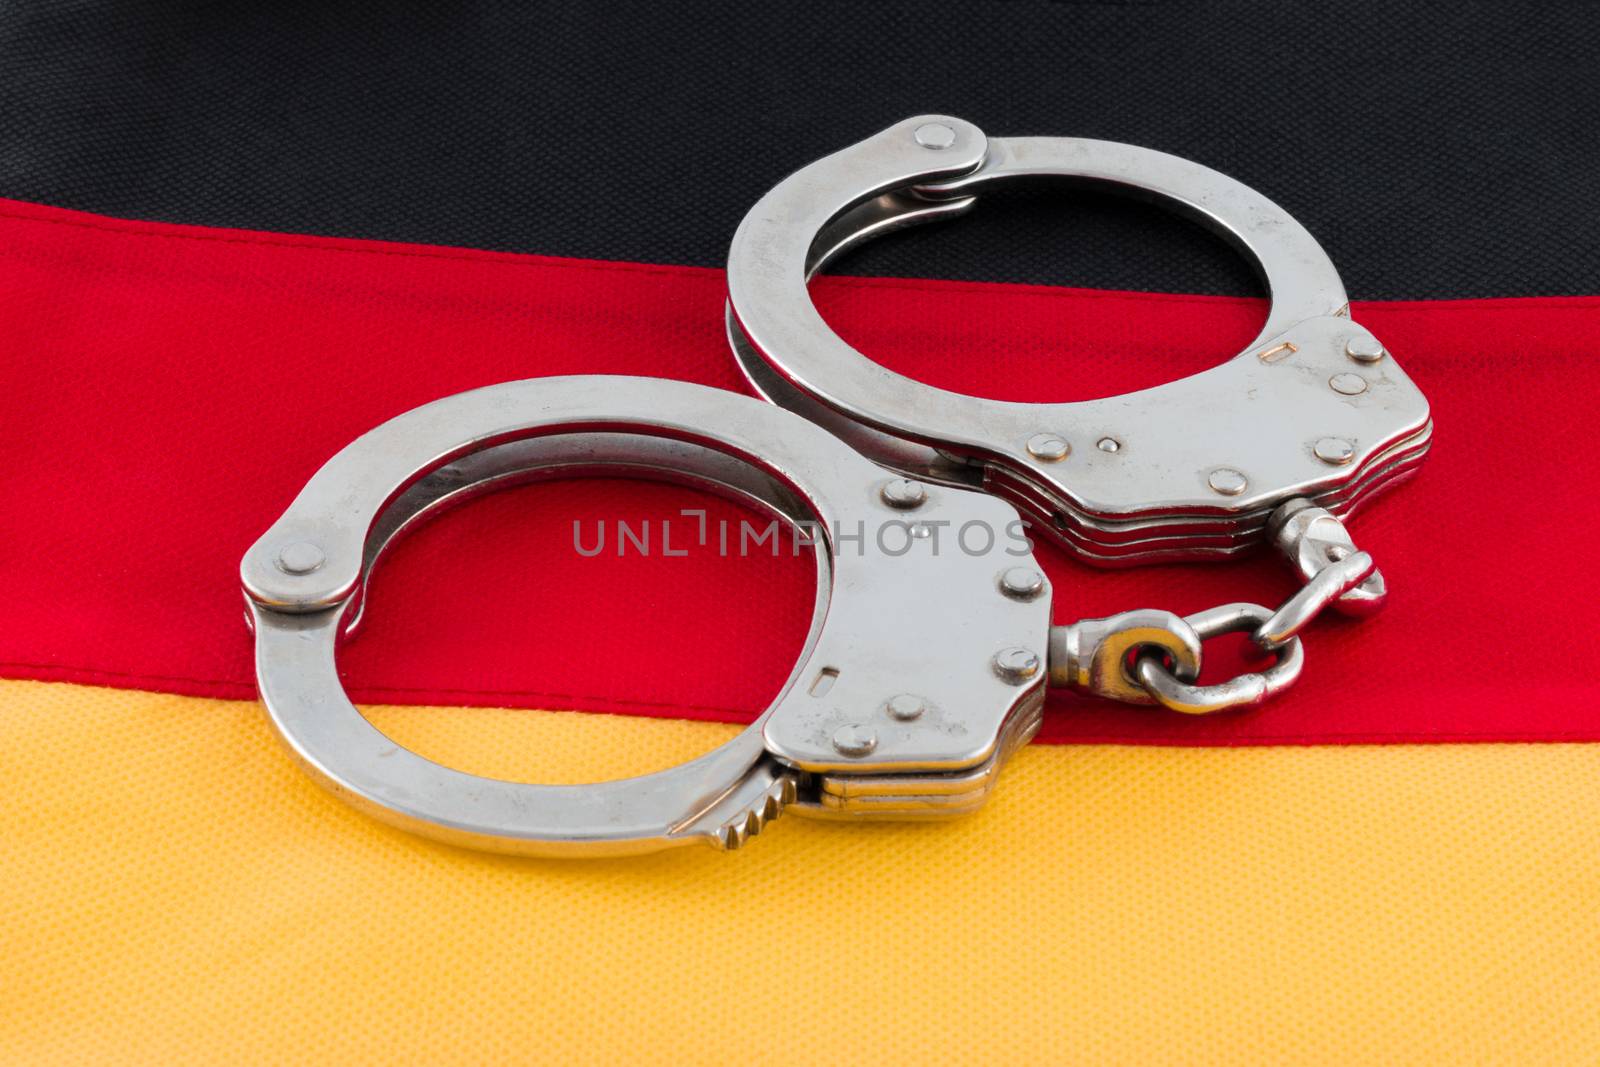 Handcuffs with signs of usage on German flag